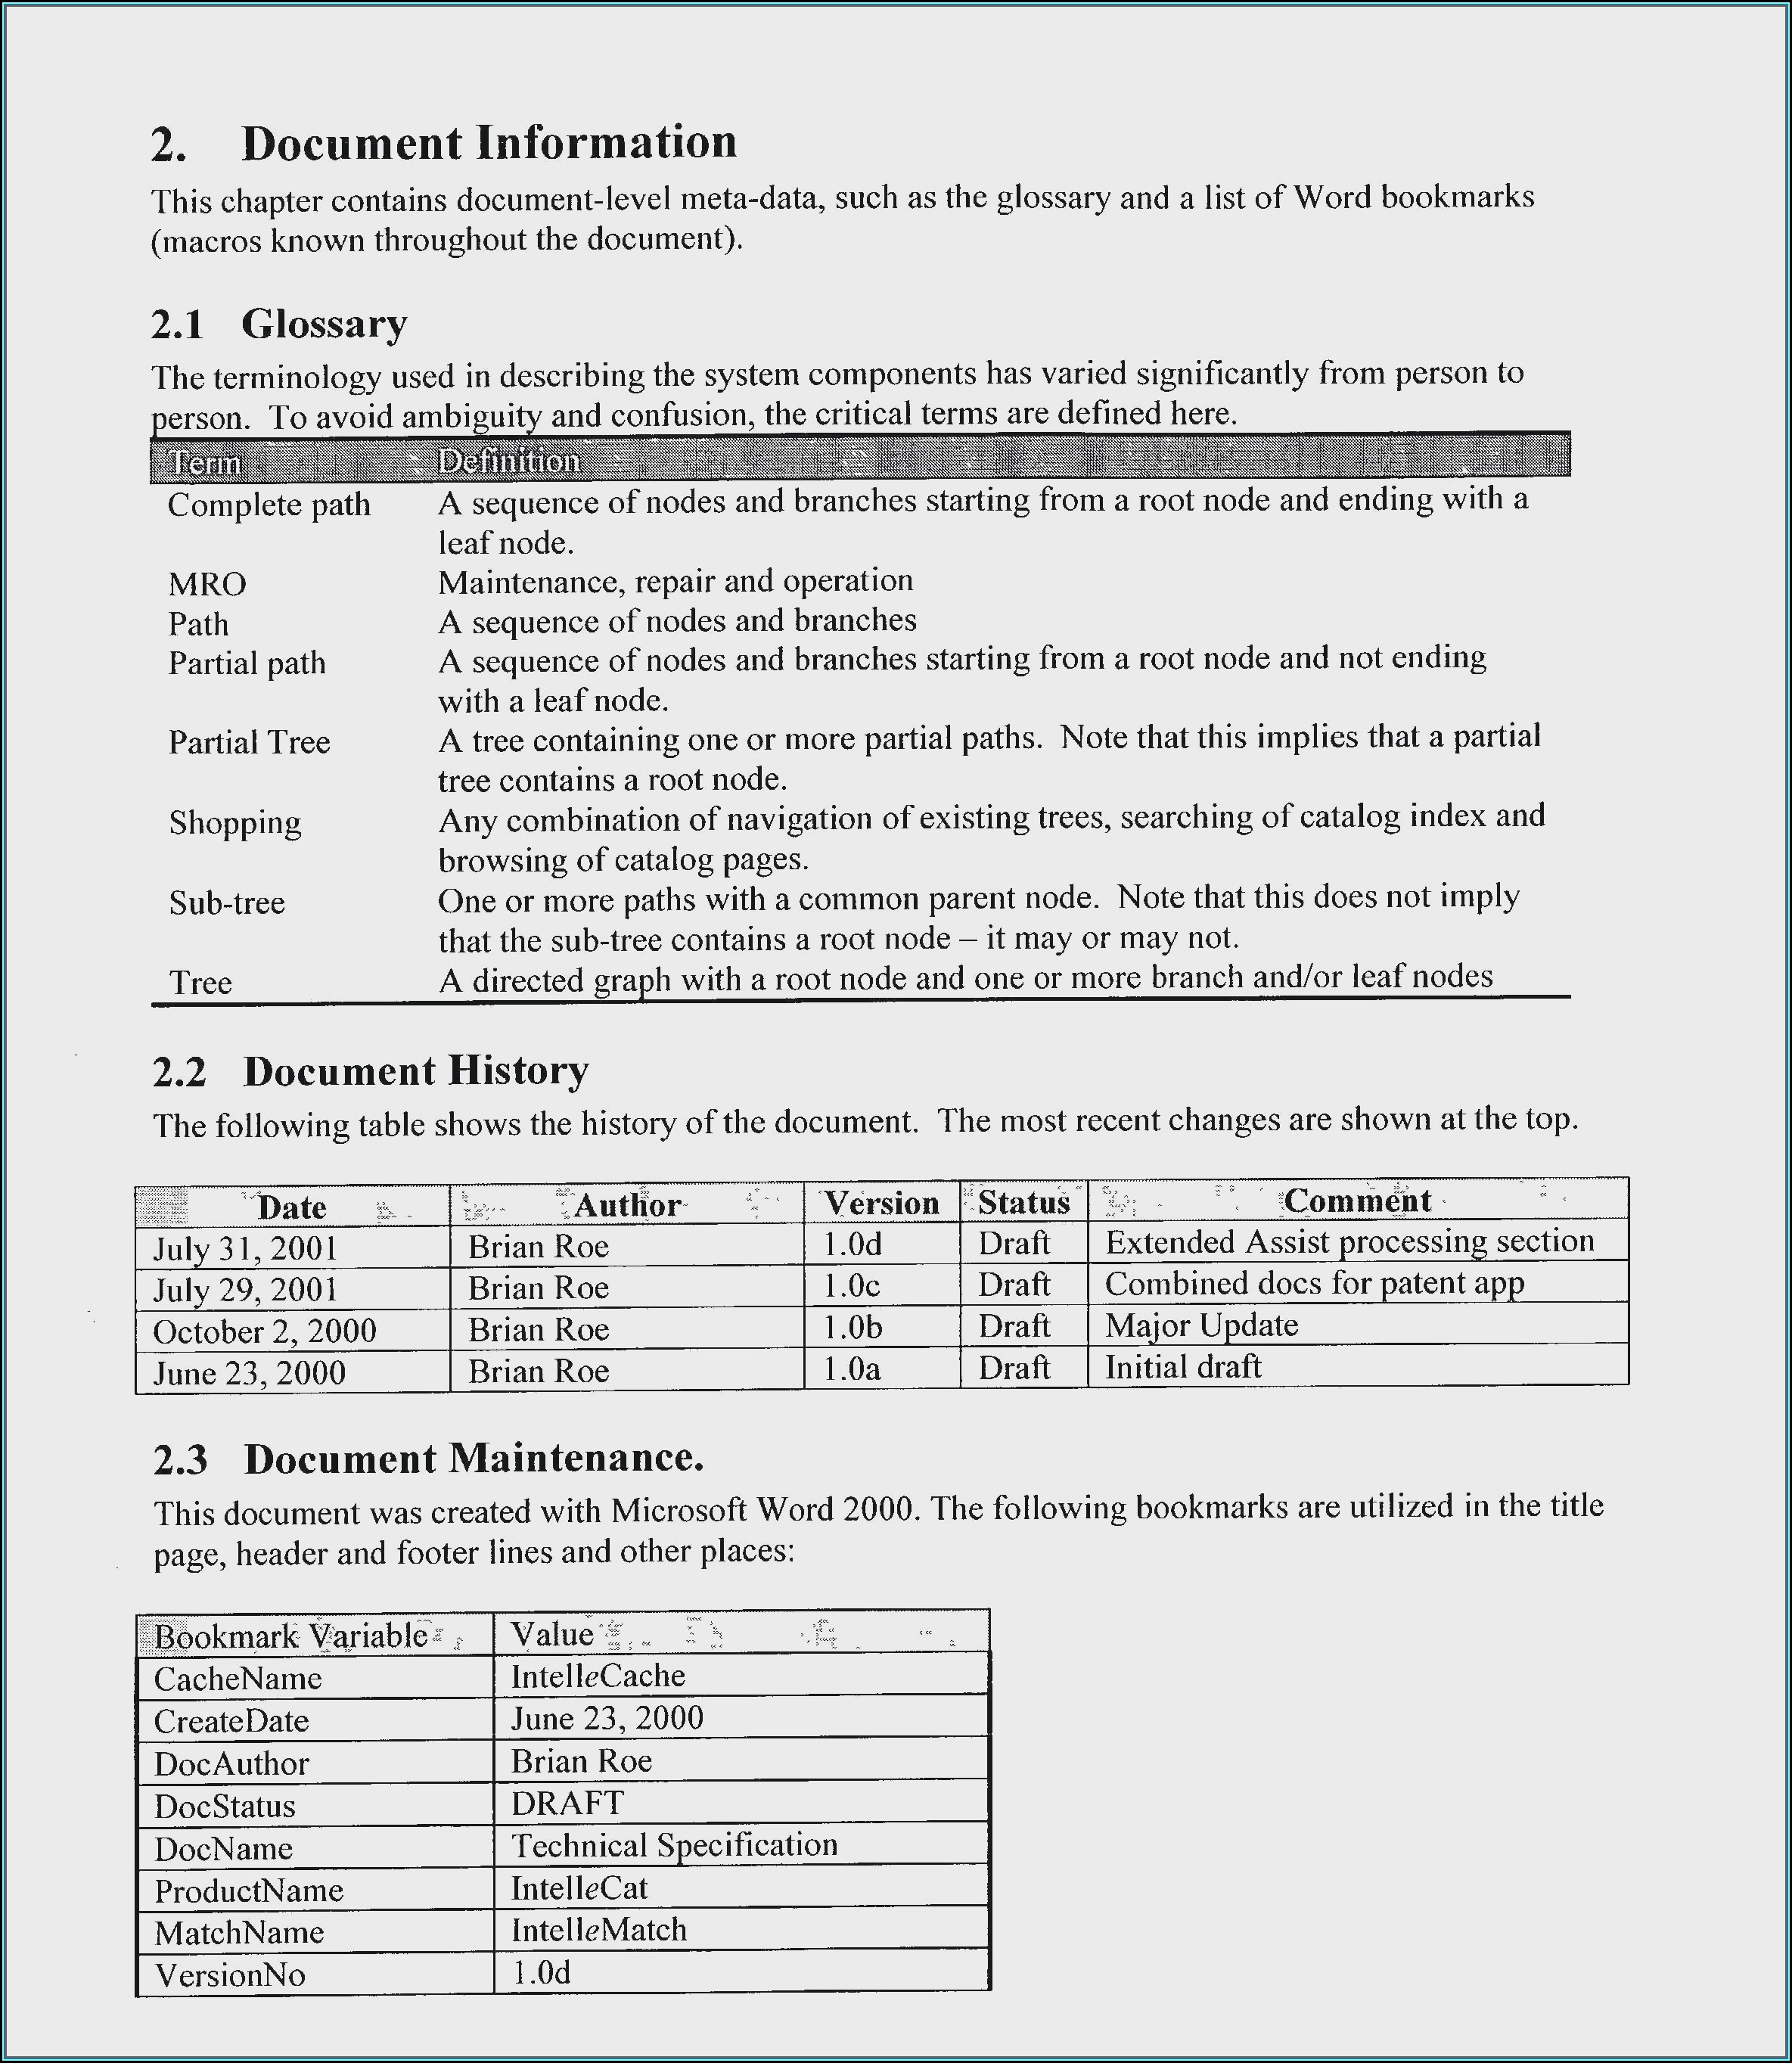 Team Operating Agreement Template Word